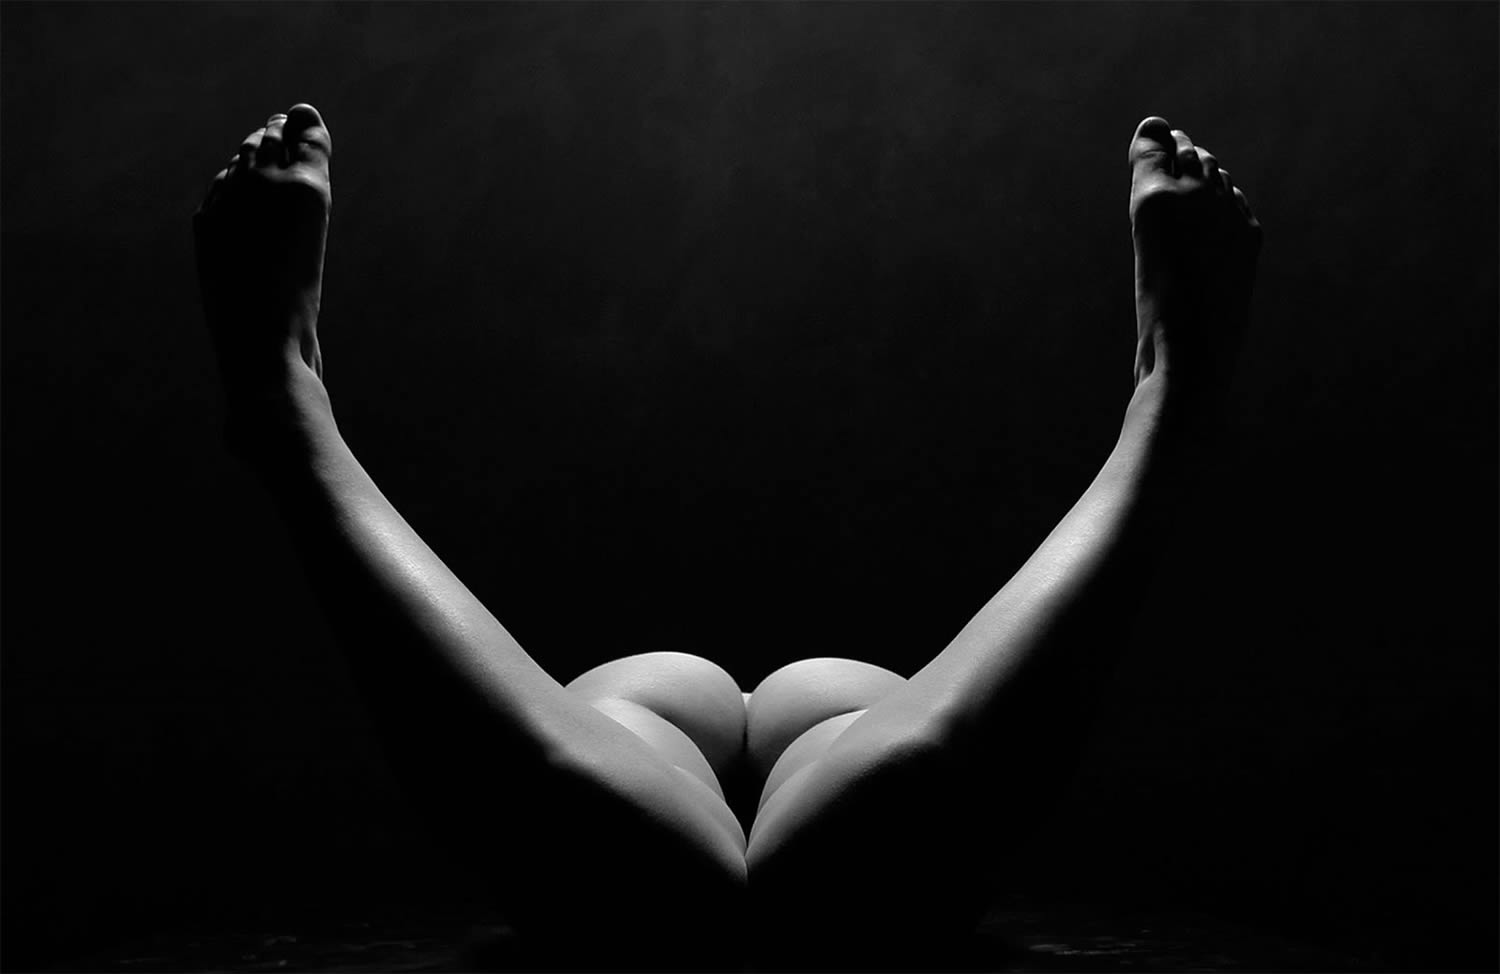 Black and White Nudes by Waclaw Wantuch.